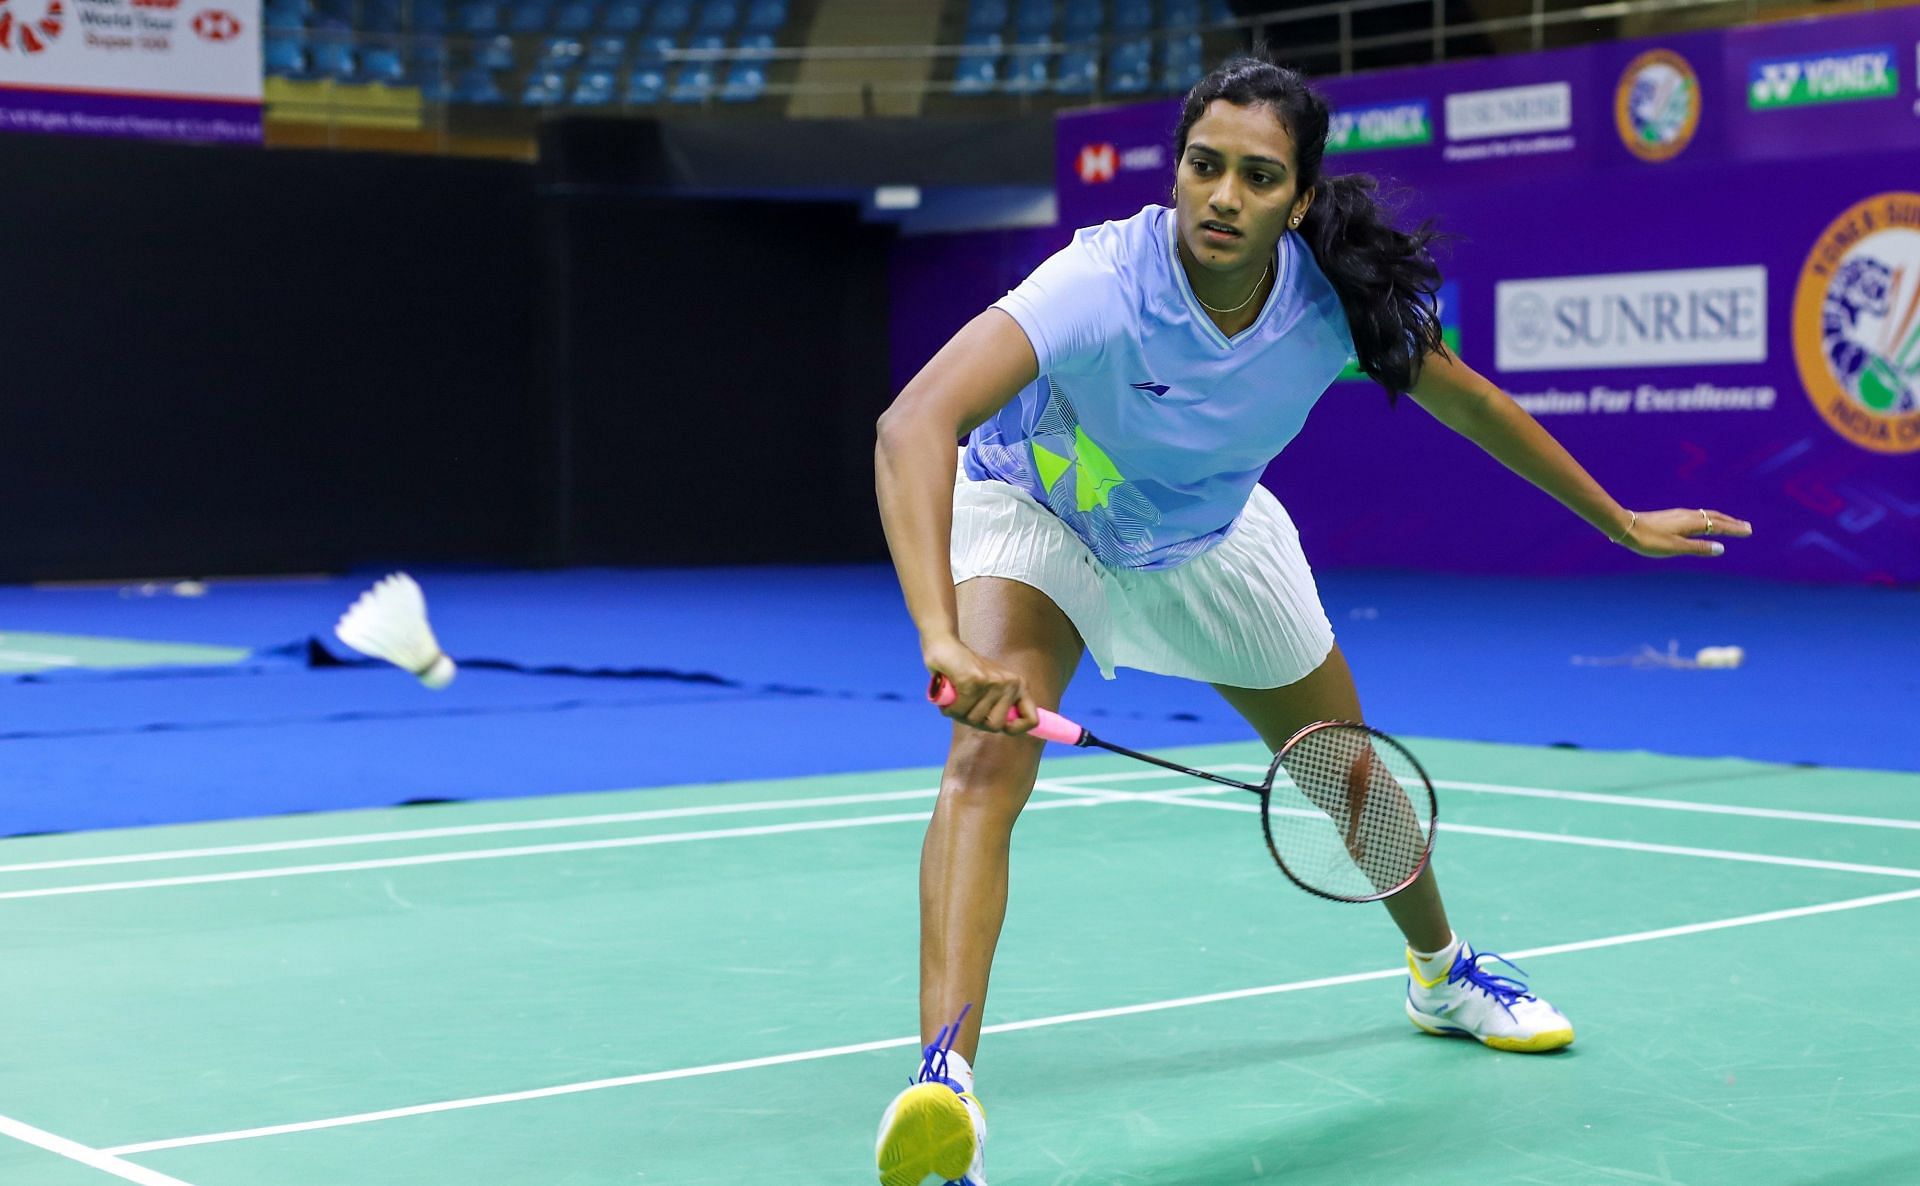 Record 26 Indian players to compete at 2022 All England Open Badminton Championships